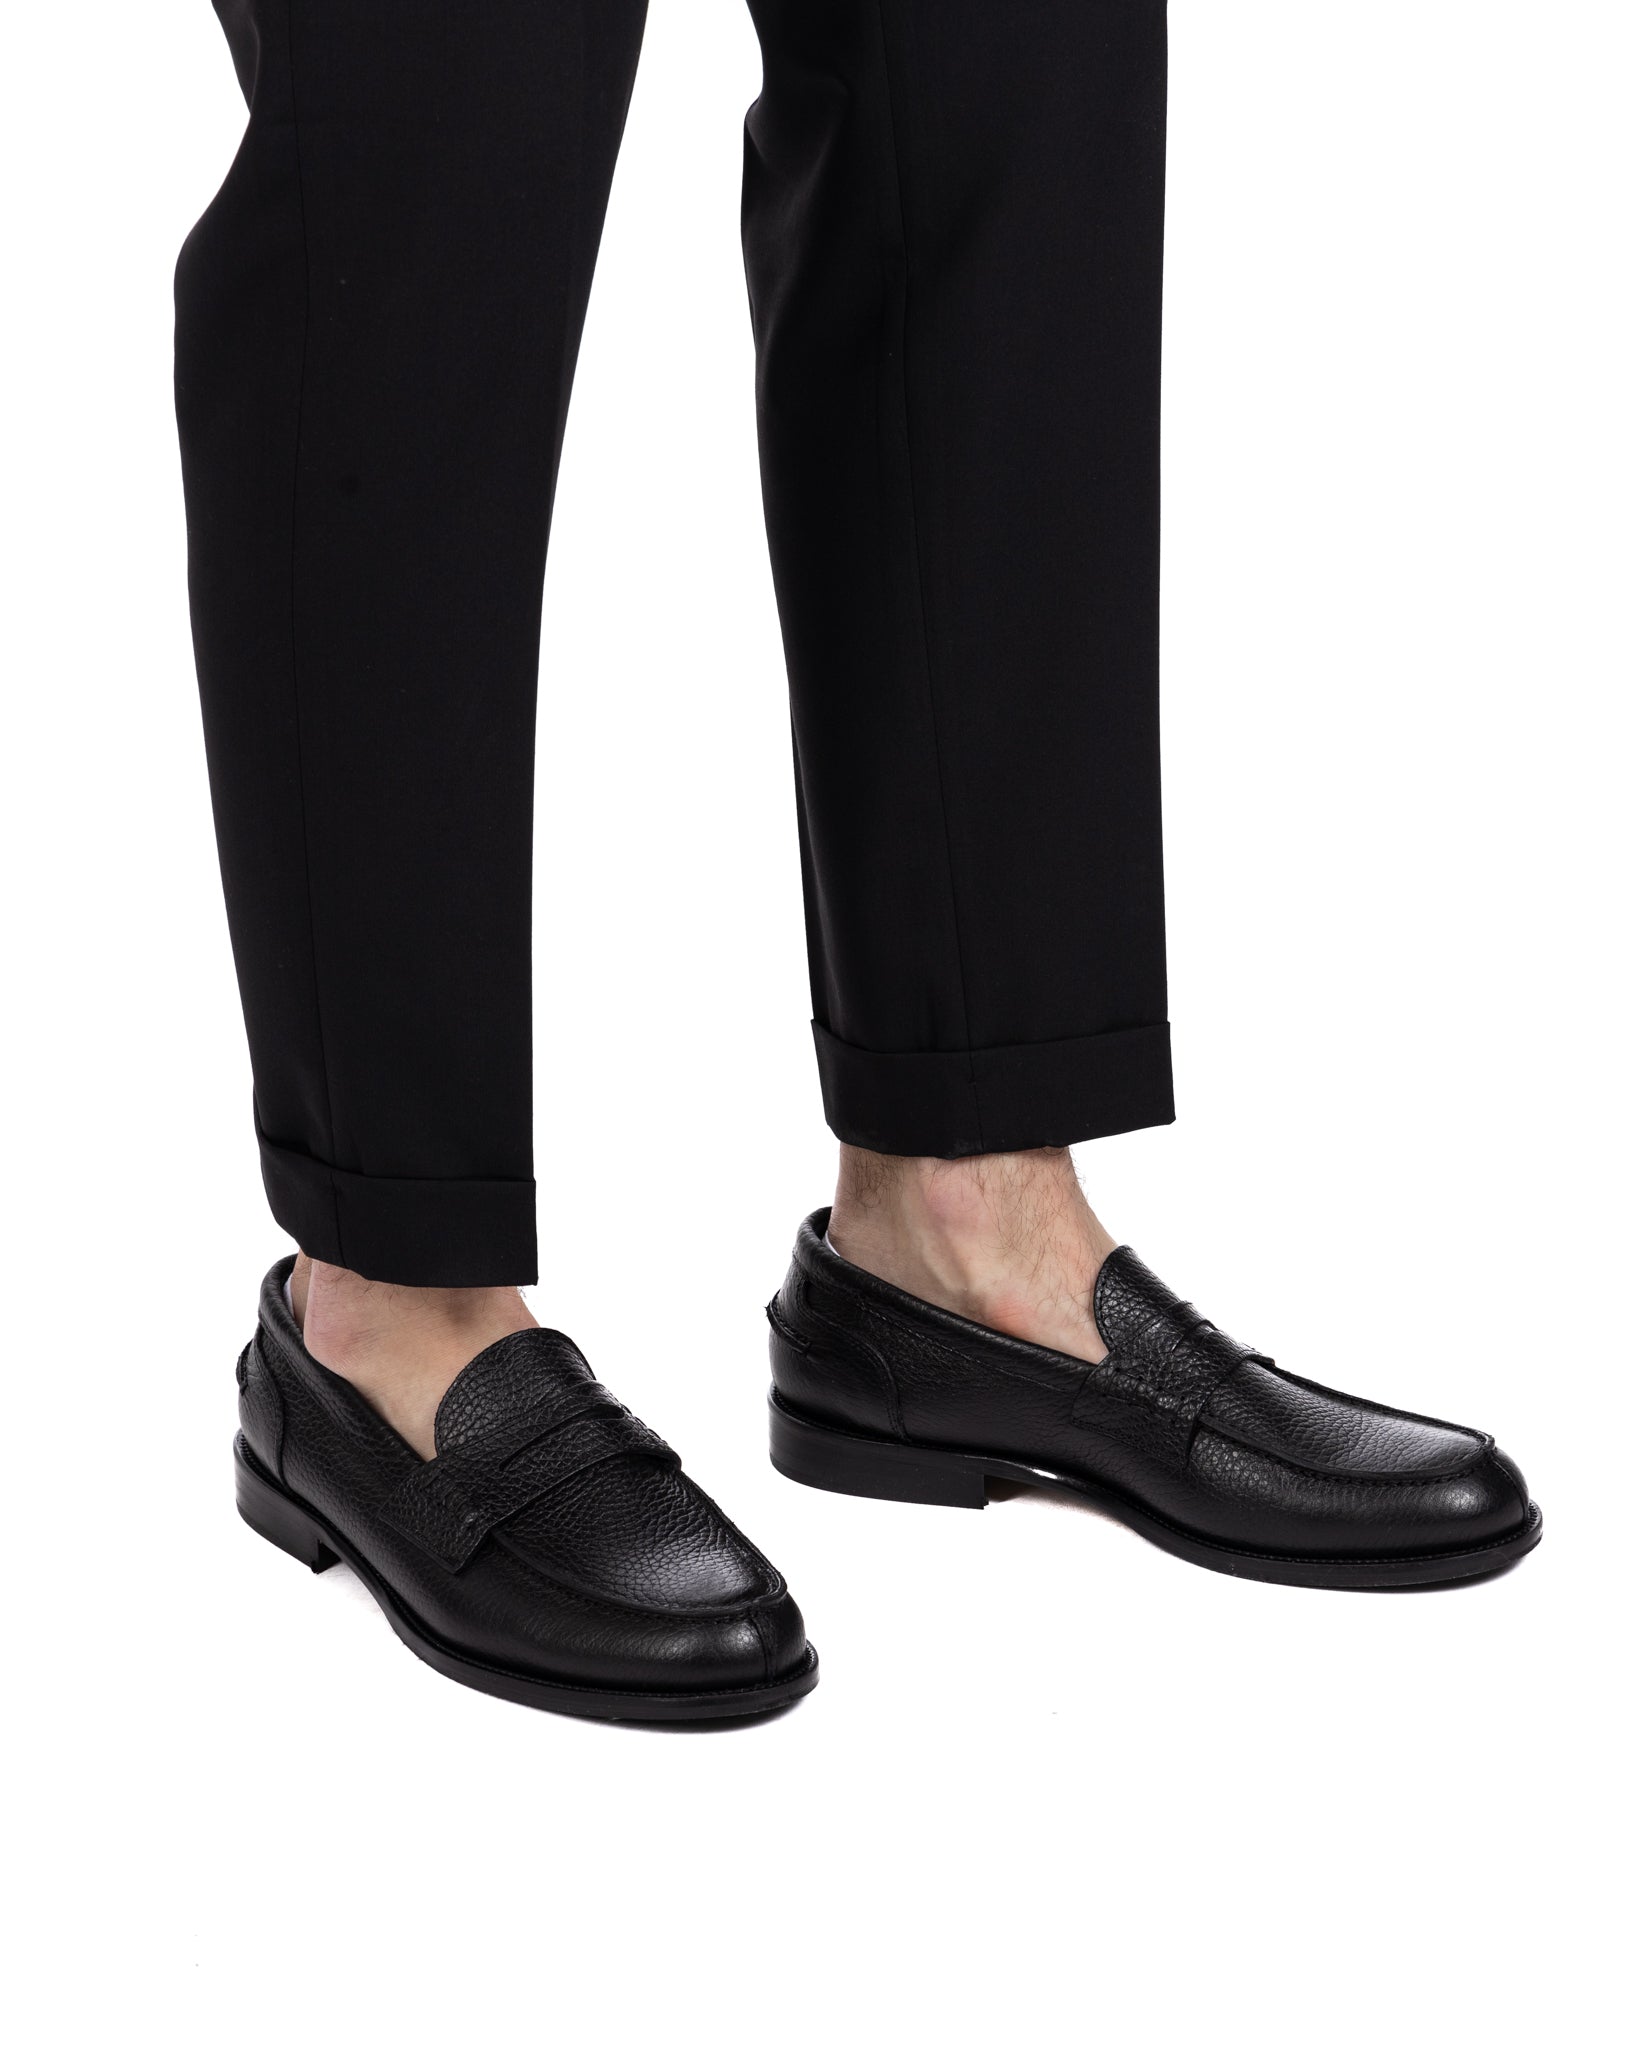 Trani - trousers with black buckles